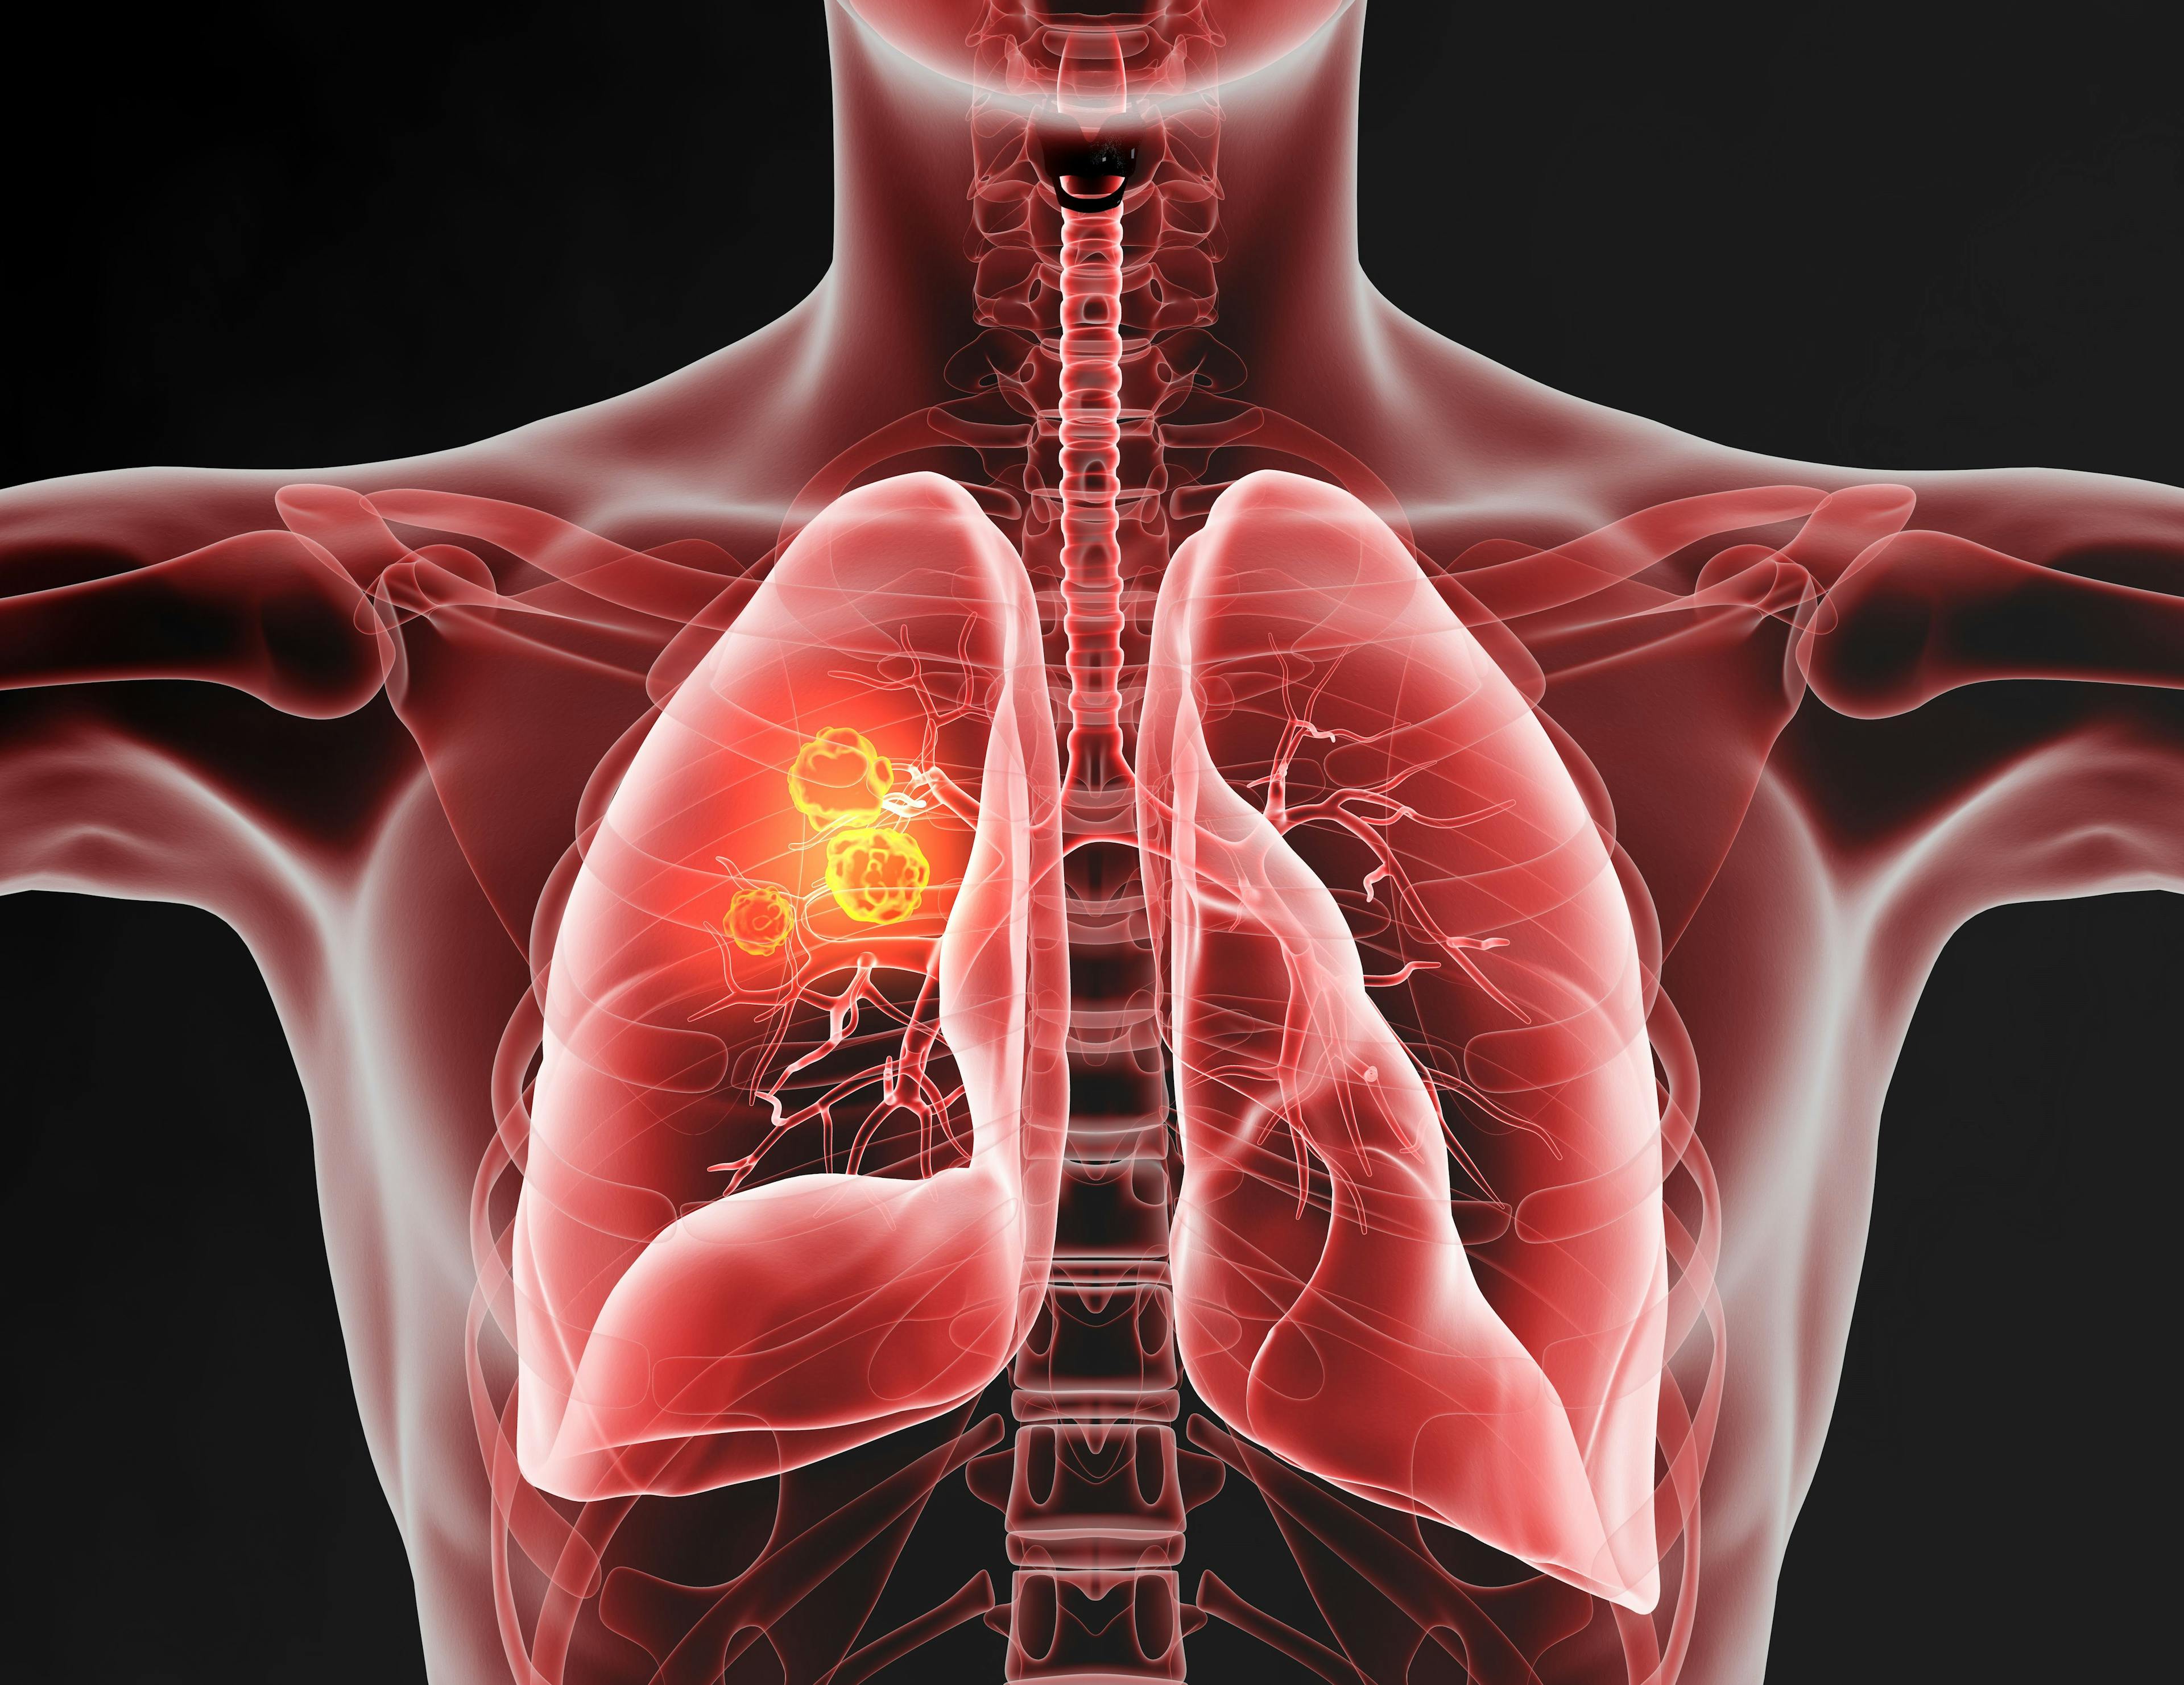 Lung cancer, medically accurate 3D illustration | Image Credit: © Axel Kock - www.stock.adobe.com